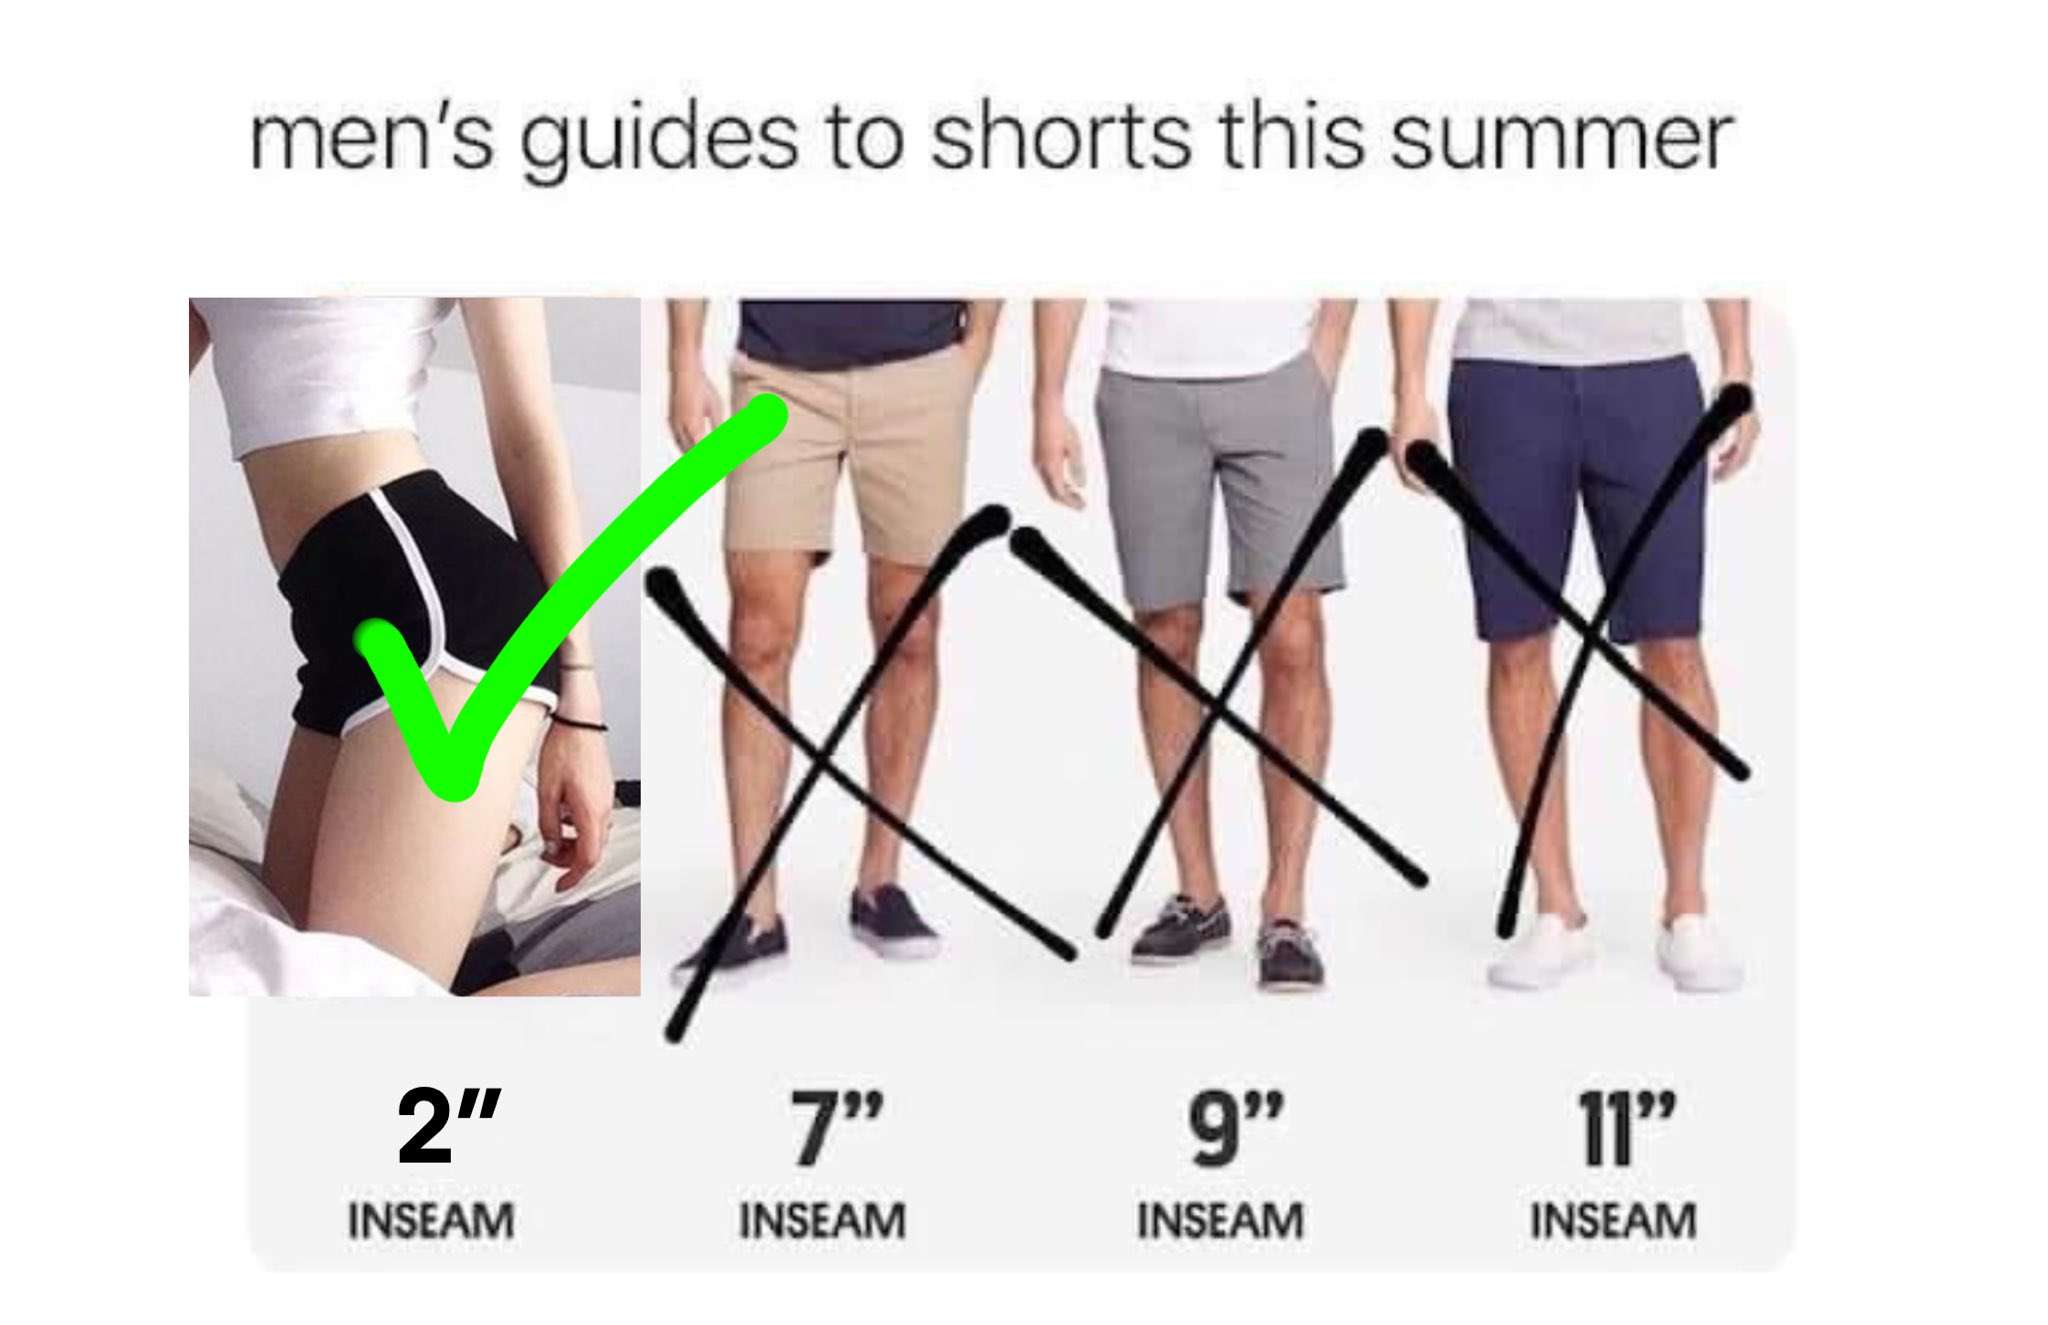 An informative image which says "mens guide to shorts this summer". Below the text is 4 images of men in shorts of various lengths, all are crossed out except for "2" inseam", that one has a checkmark